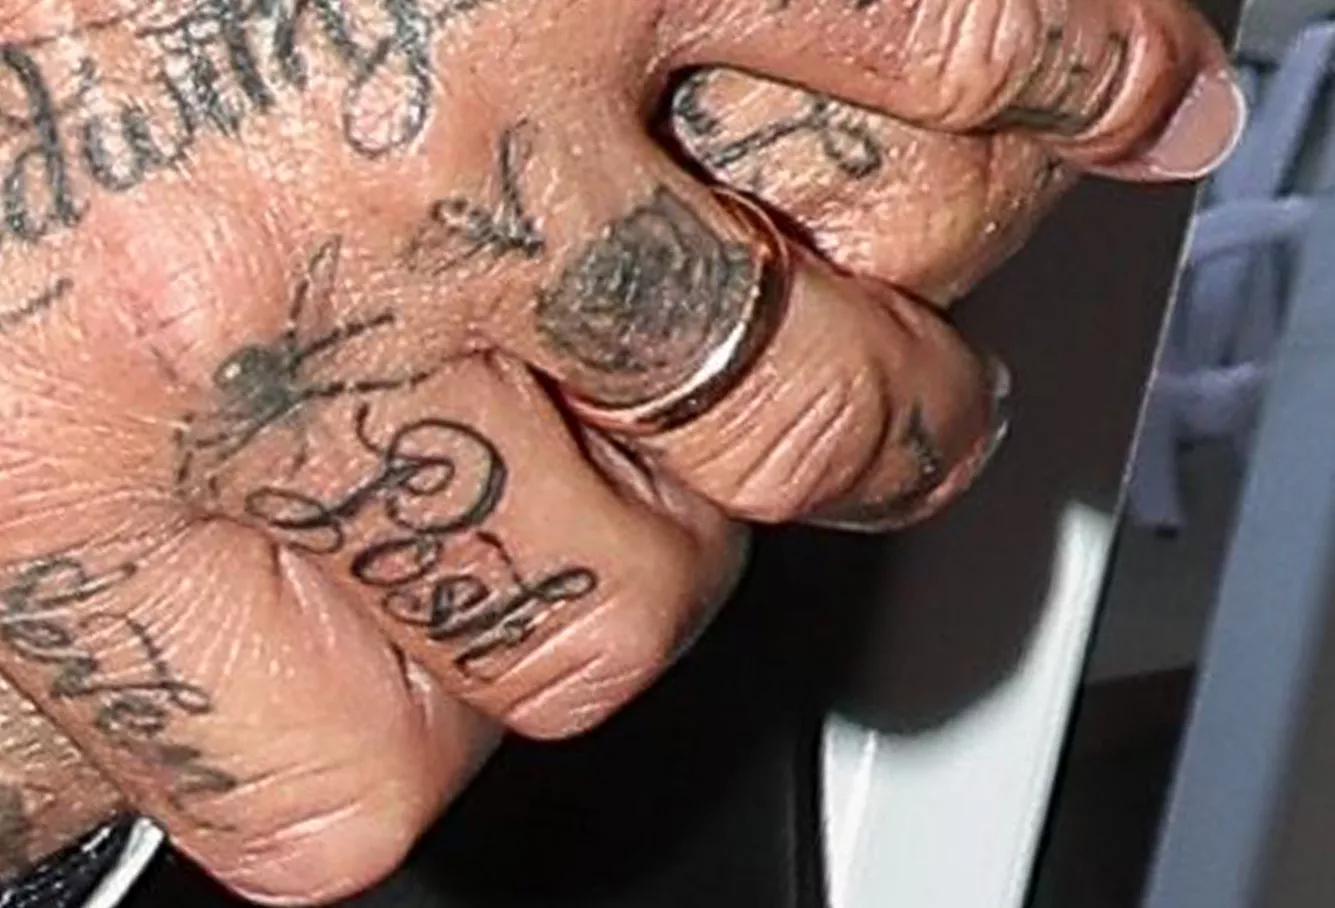 David Beckham has a new "Posh" tattoo on his finger in honor of his wife, Victoria Beckham.